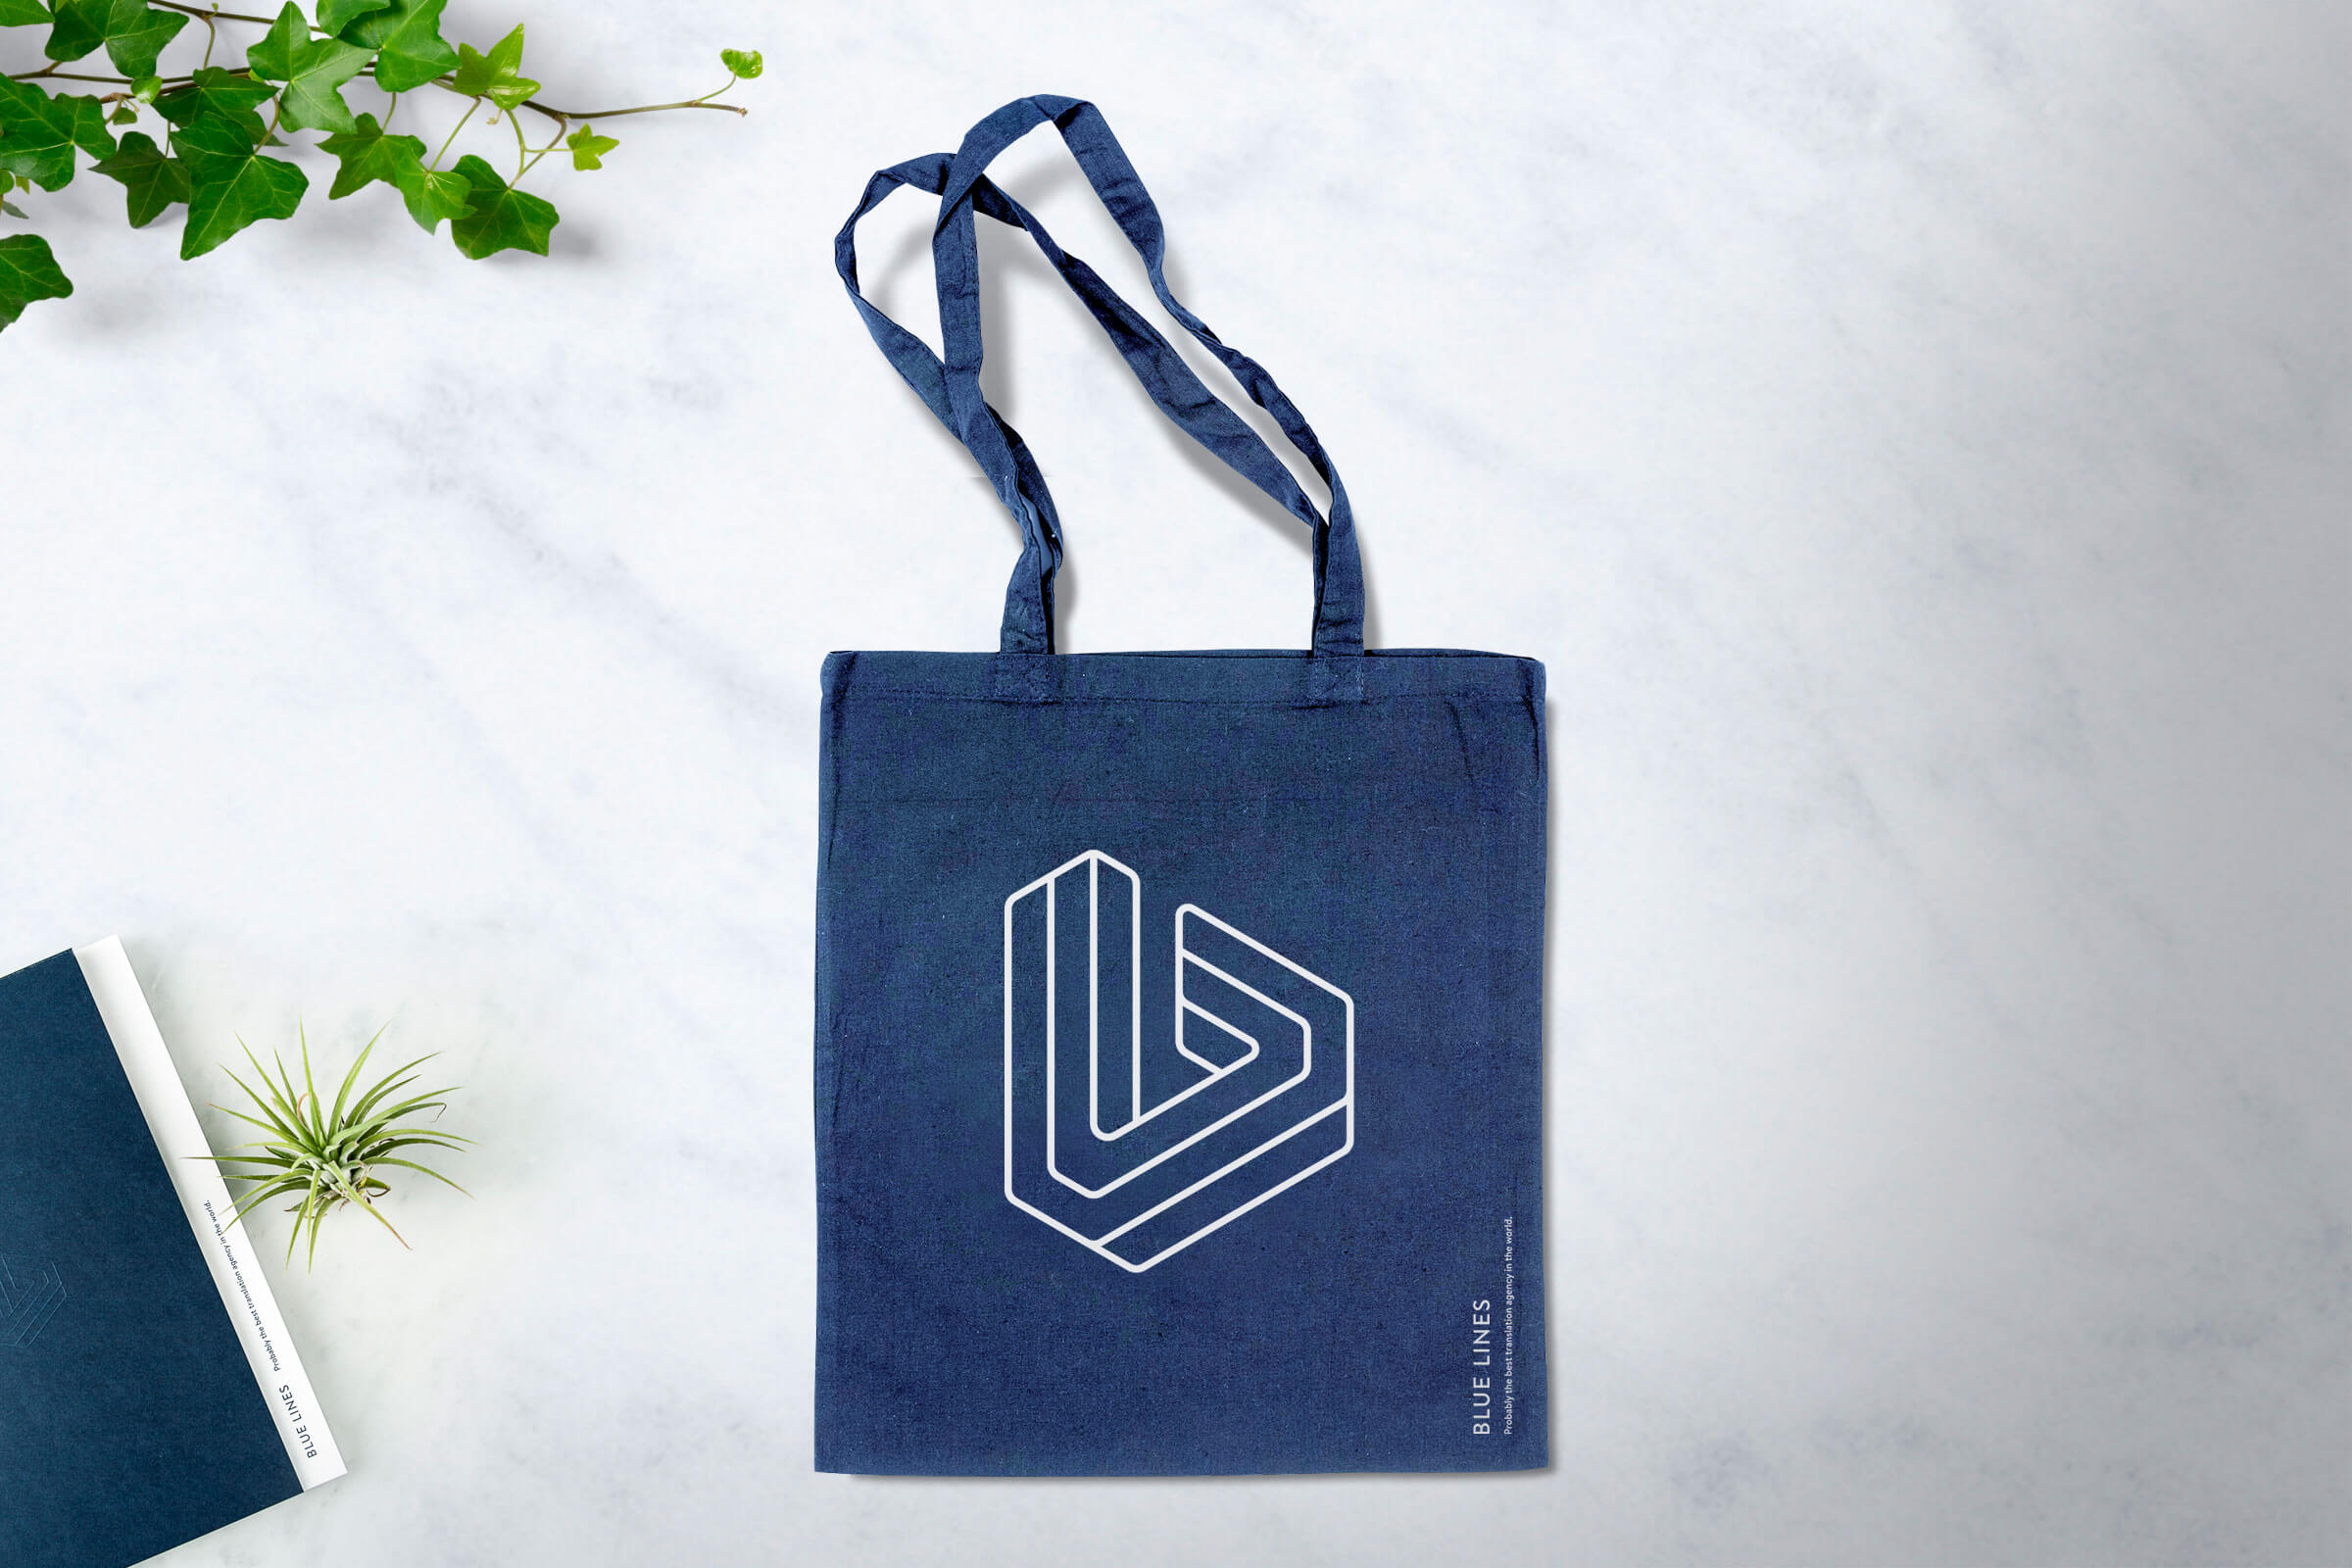 Free-Back-Cotton-Tote-Shopping-Bag-Mock-up-PSD-1